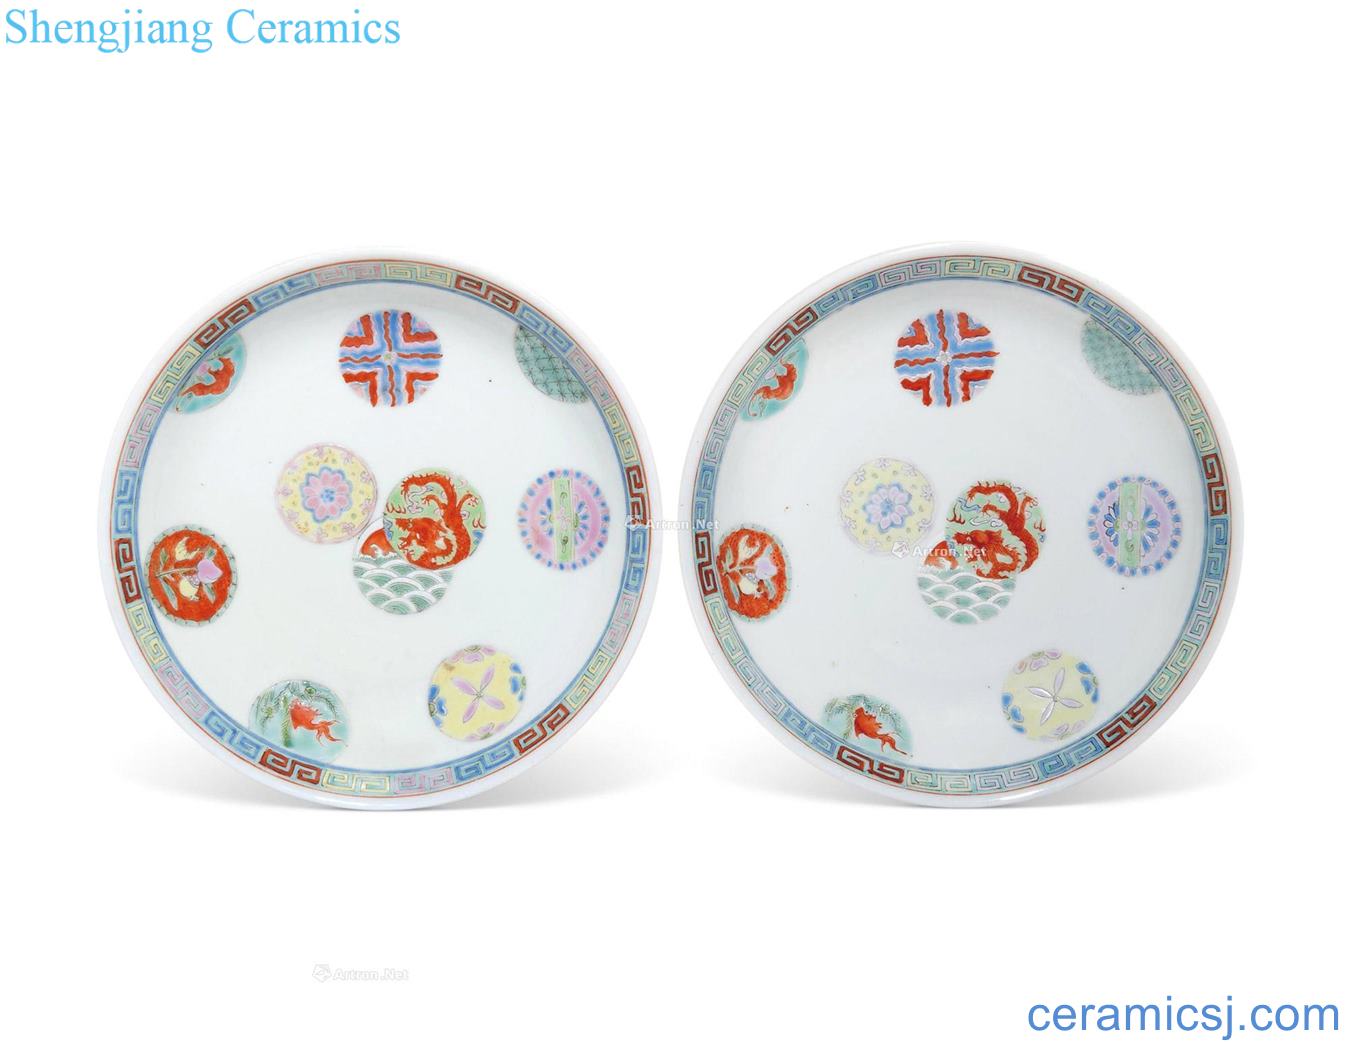 Pastel reign of qing emperor guangxu ball pattern plate (a)